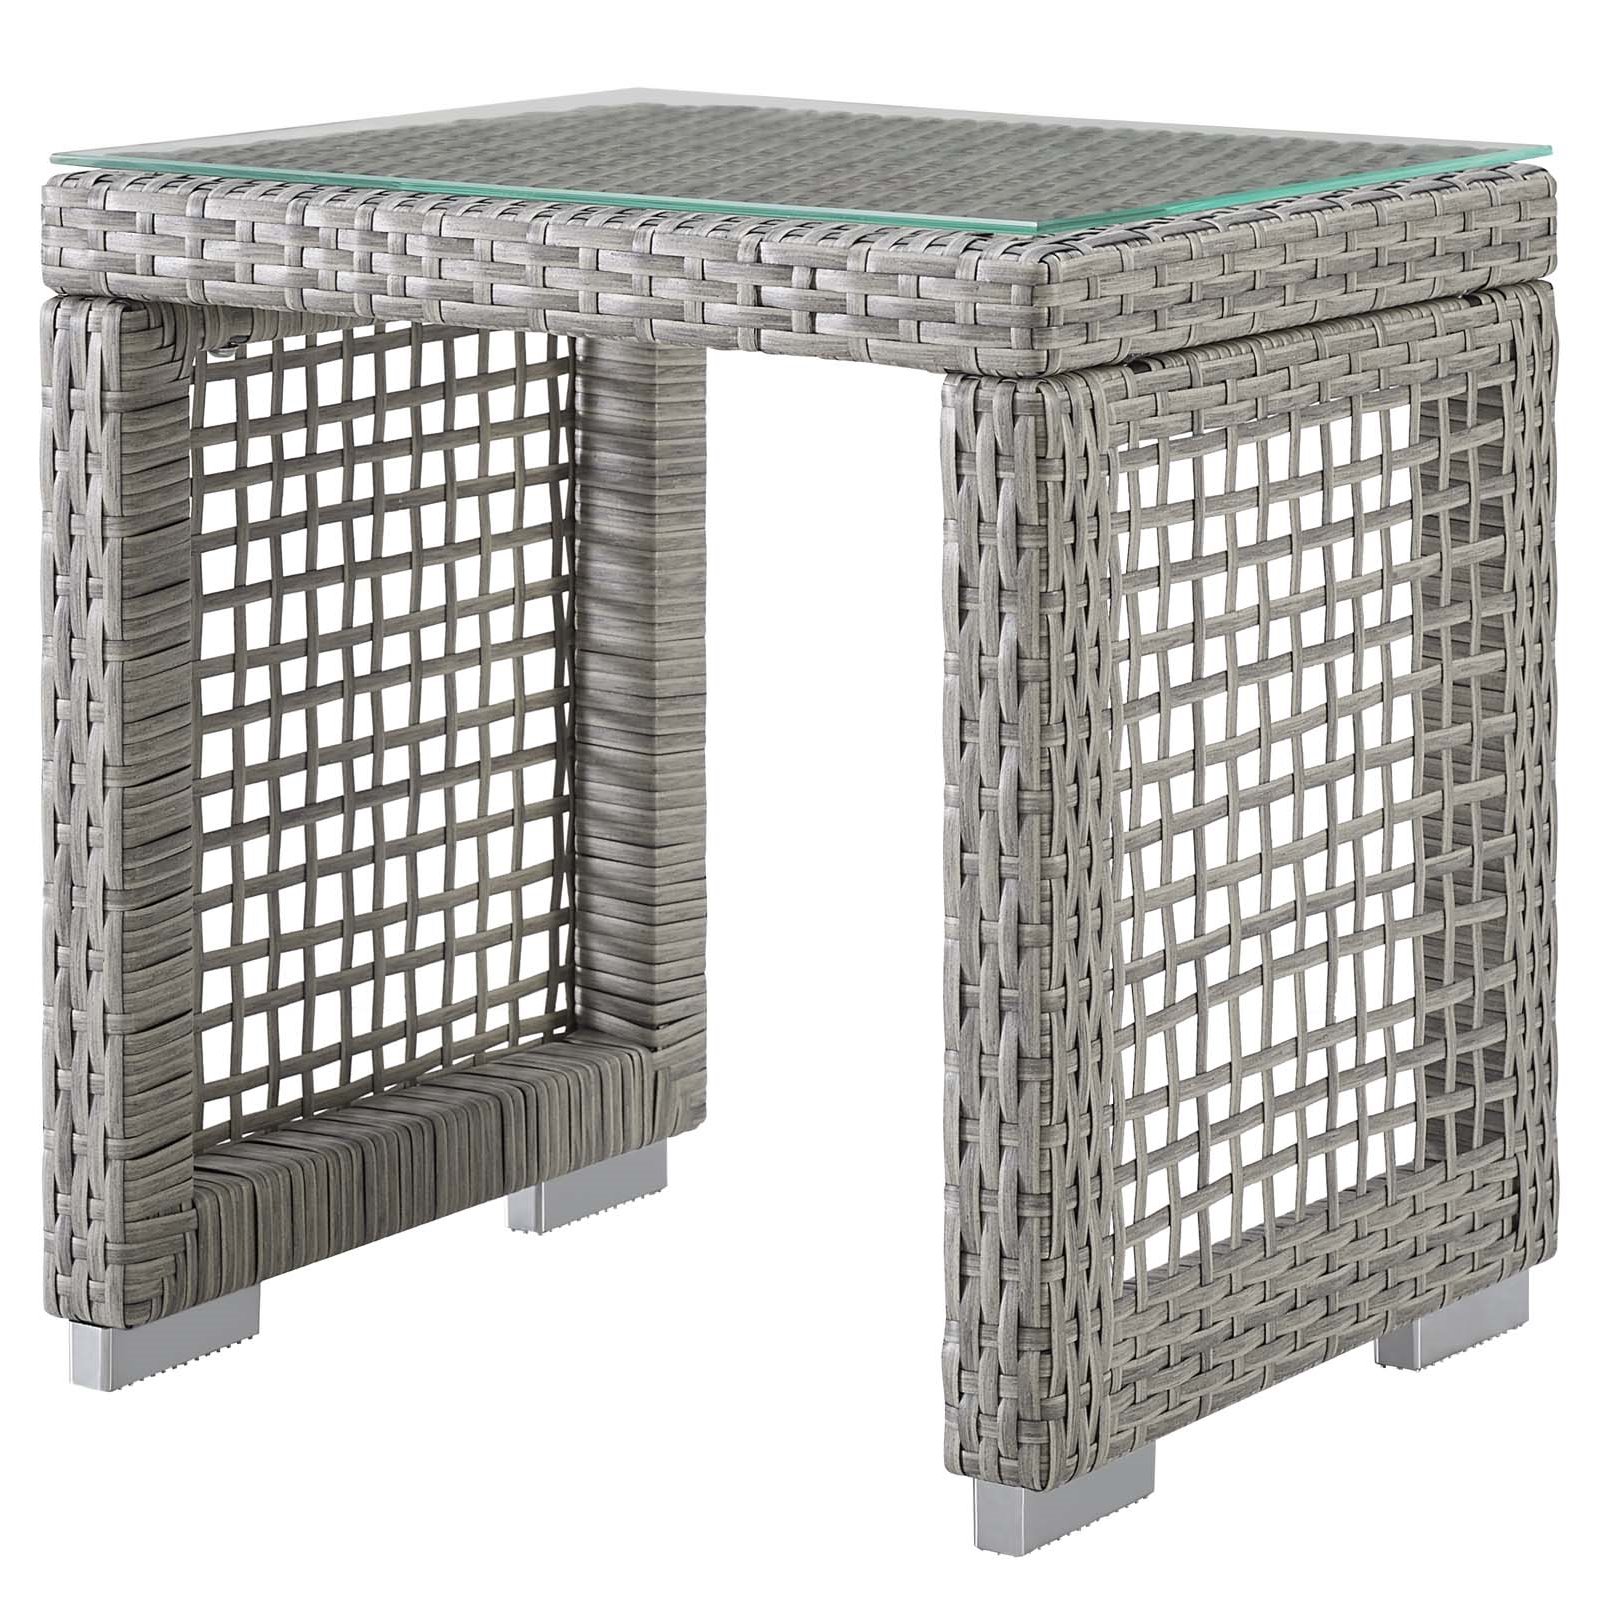 Contemporary Modern Urban Designer Outdoor Patio Balcony Garden Furniture Lounge Chair and Coffee Side Table Set, Rattan Wicker Fabric, Grey Gray - image 5 of 8